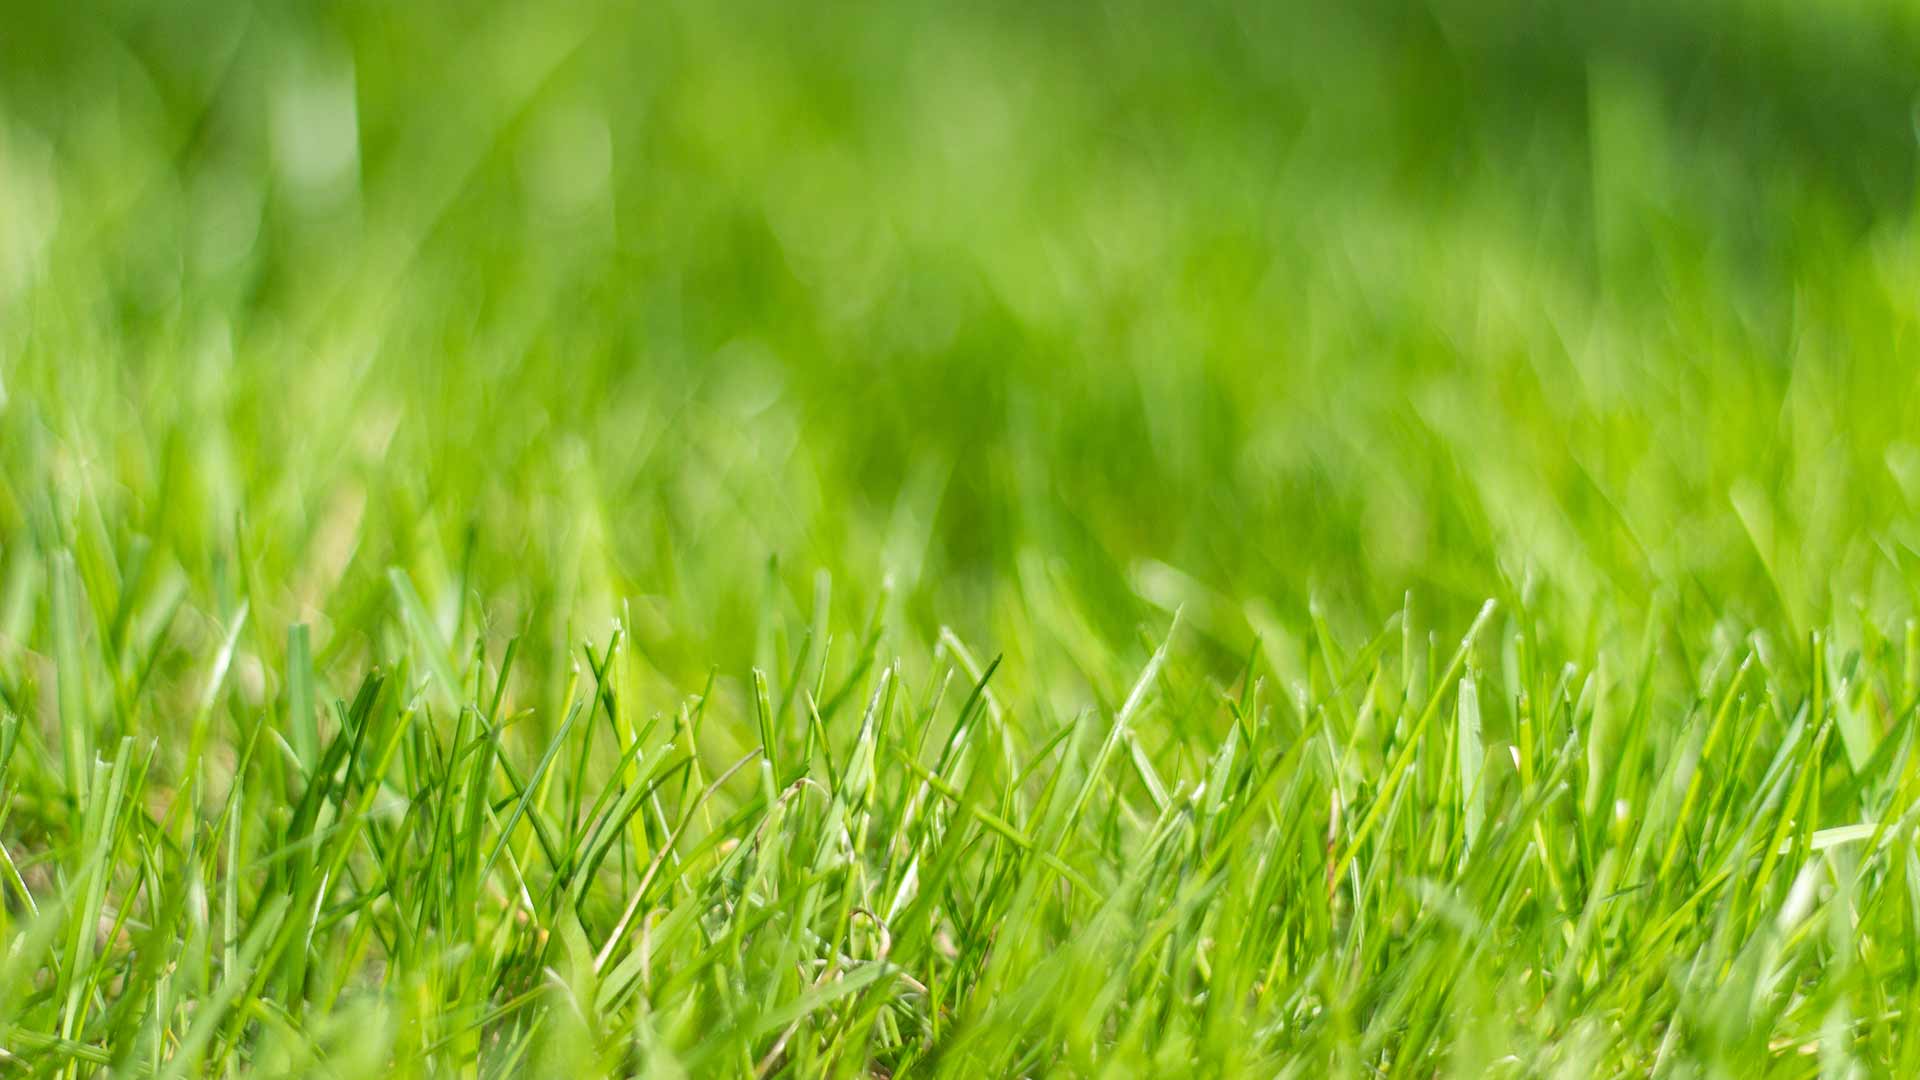 Healthy lawn with regular lawn care services near Shelby, Ohio.